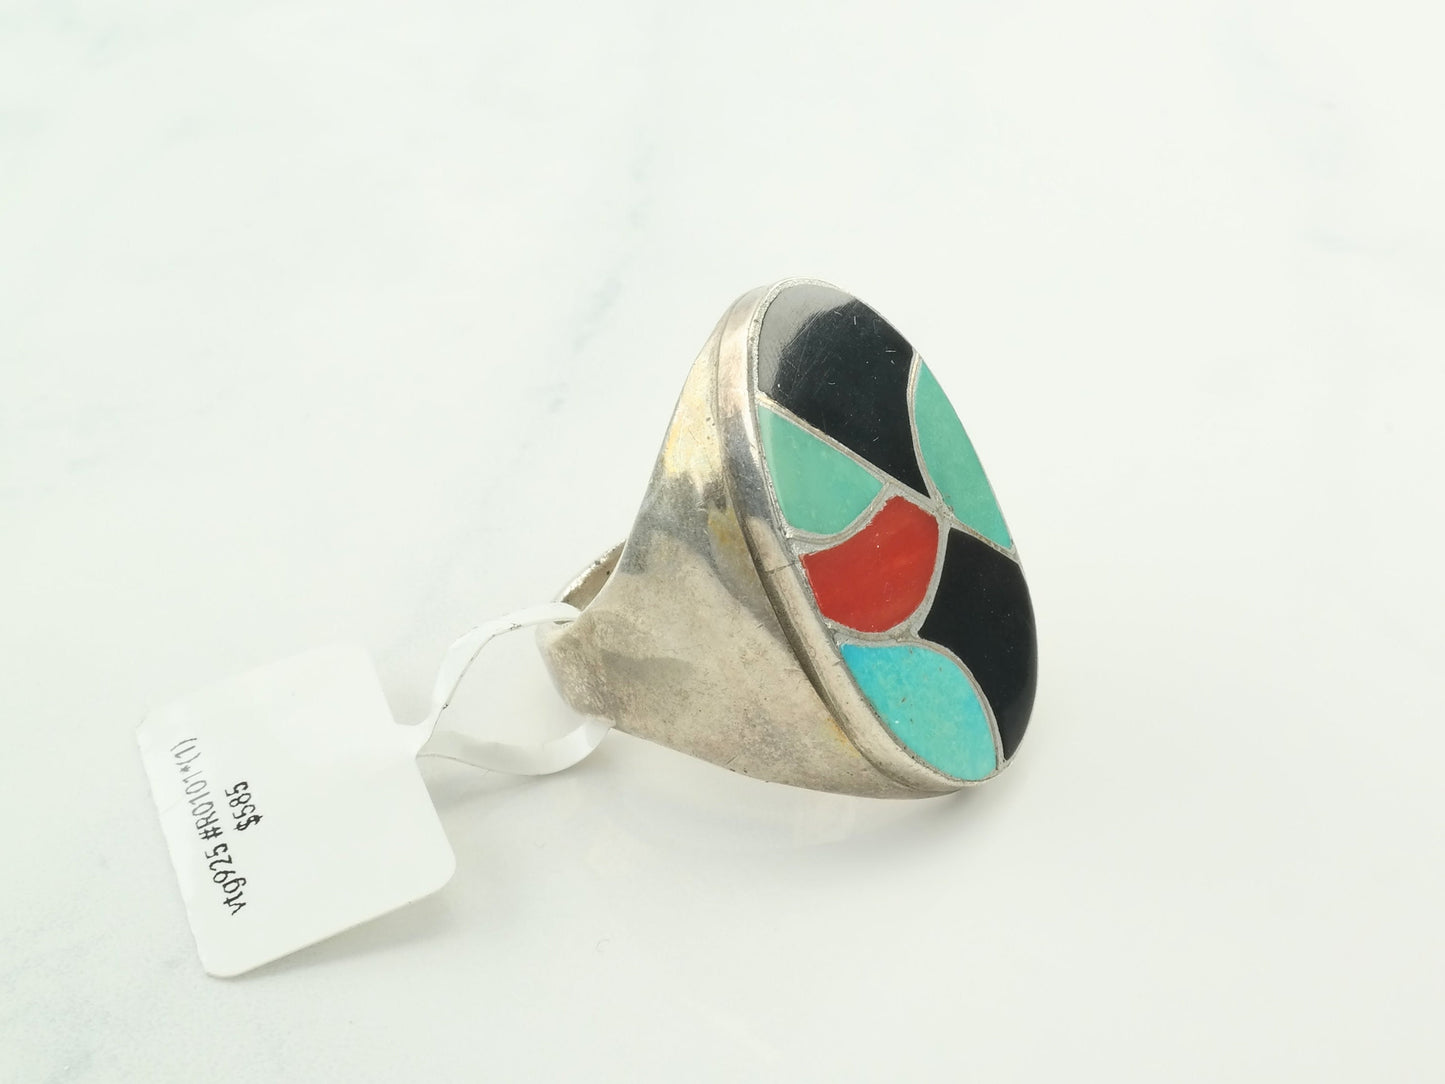 Vintage Native American Silver Ring Turquoise Coral Onyx Inlay Sterling Red Green Black Size 10 3/4